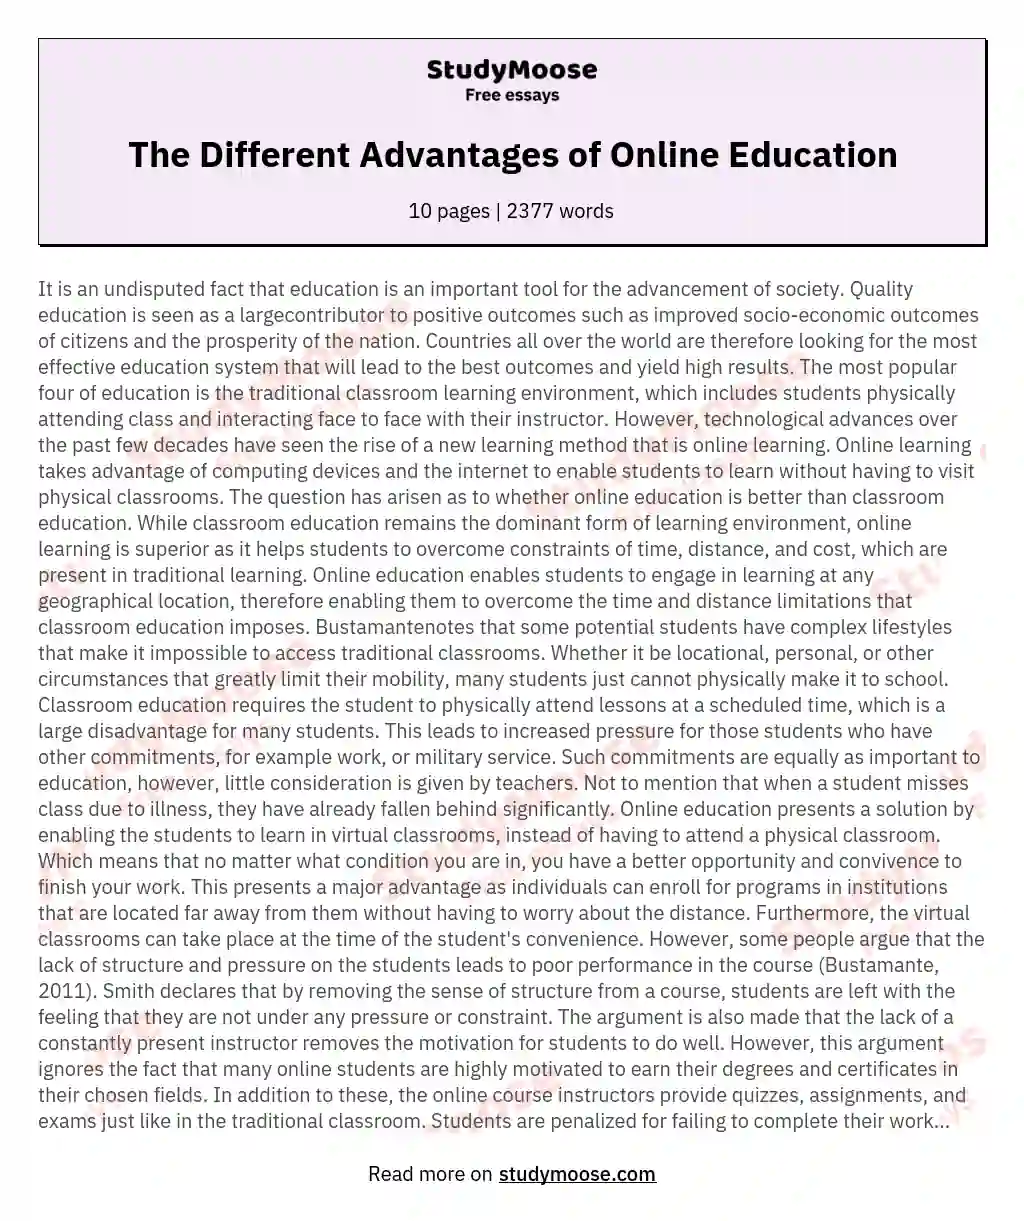 The Different Advantages of Online Education essay